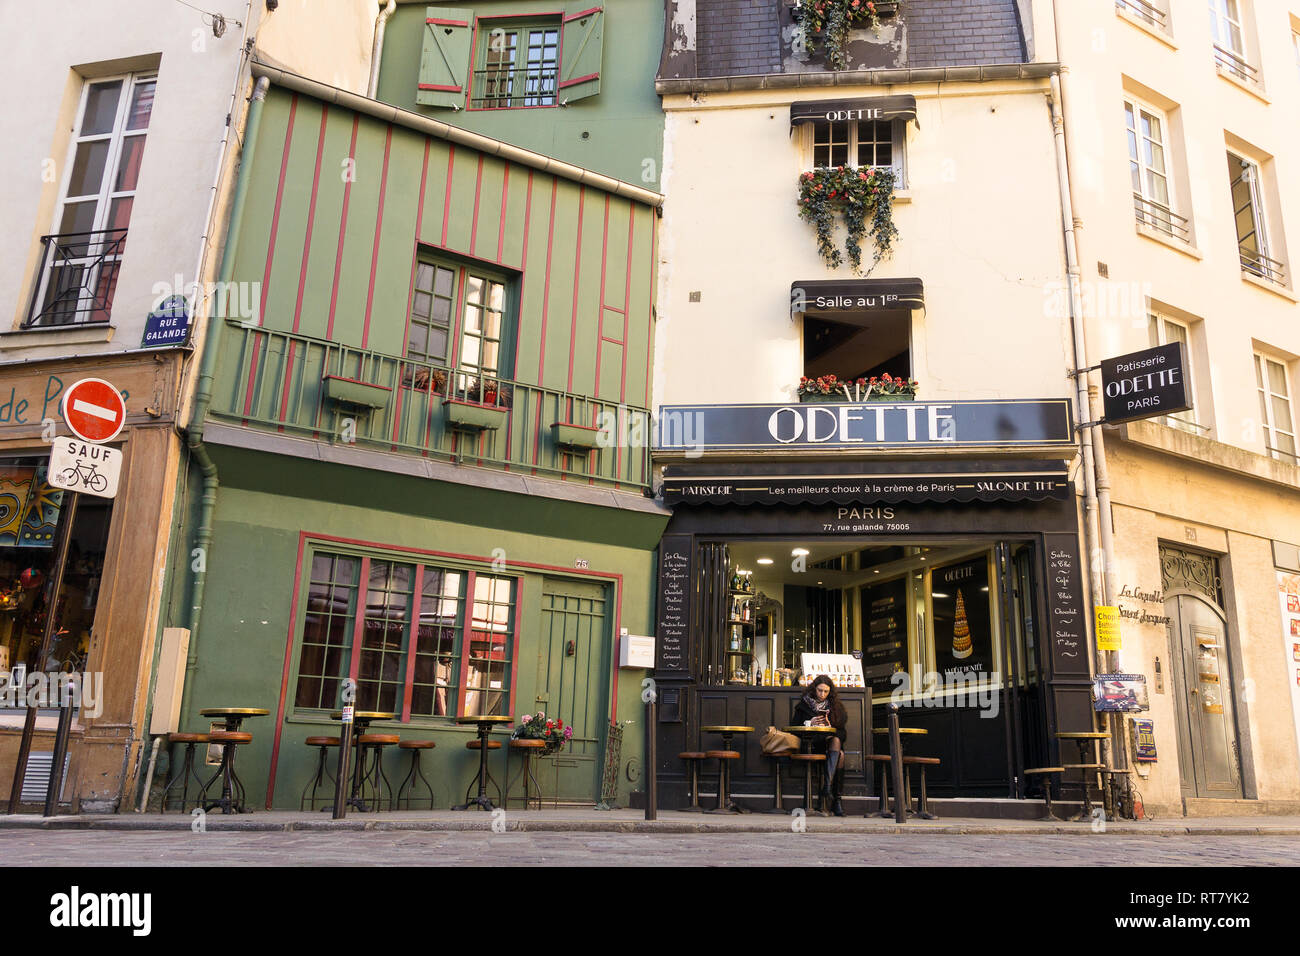 Paris Odette - choux pastry shop on Rue Galand in the 5th arrondissement of Paris, France, Europe. Stock Photo